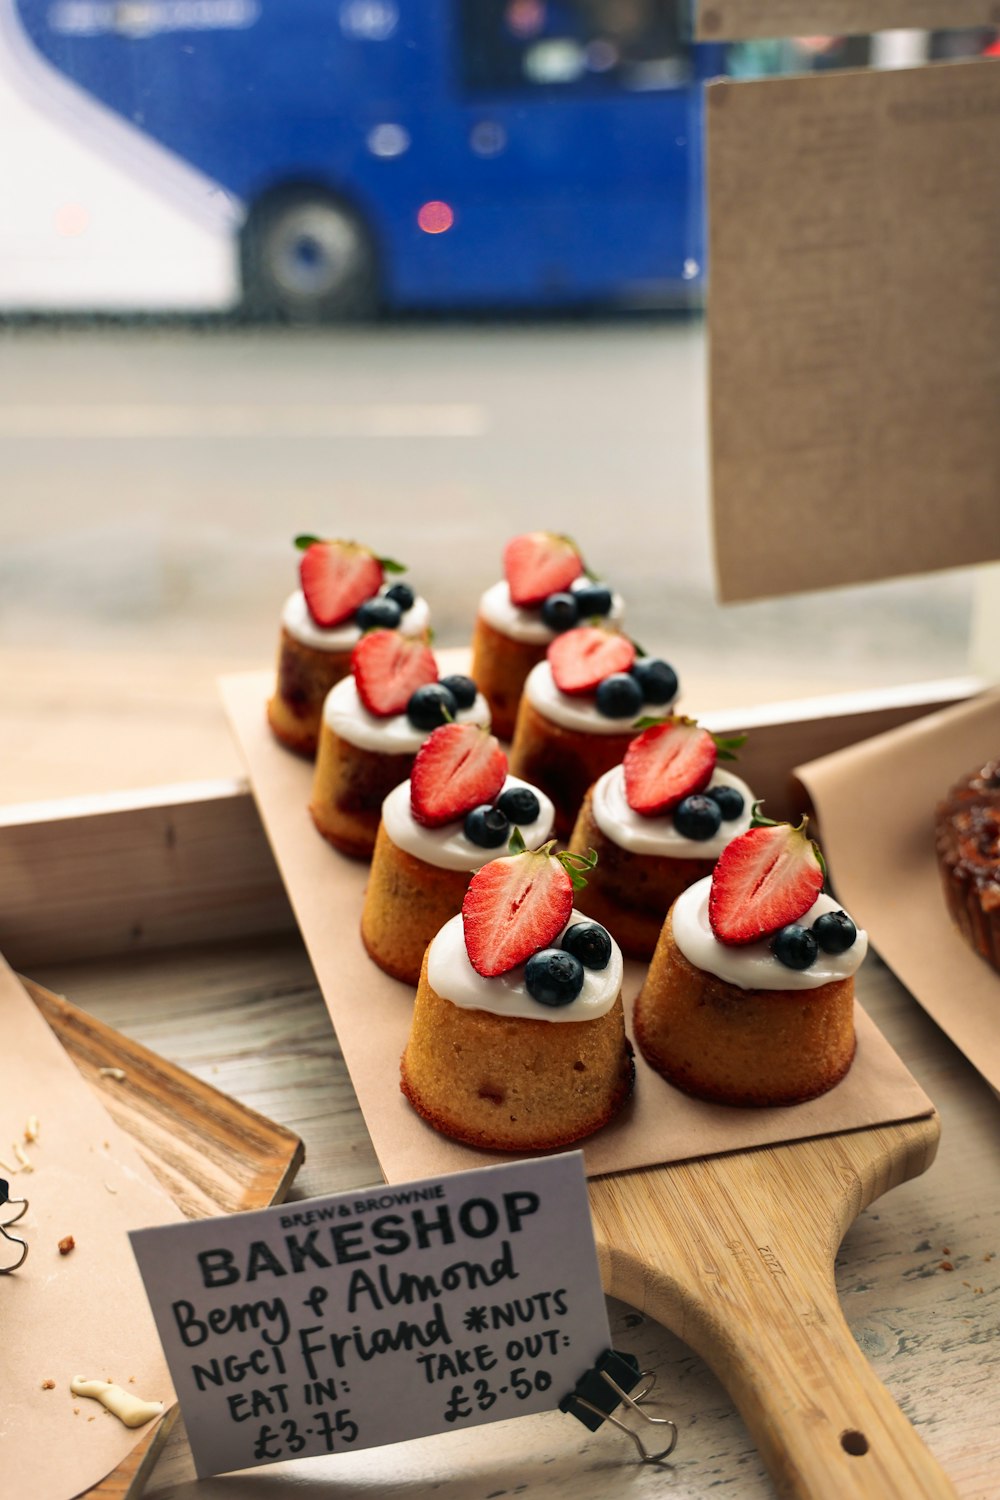 a display of pastries with strawberries and blueberries on them